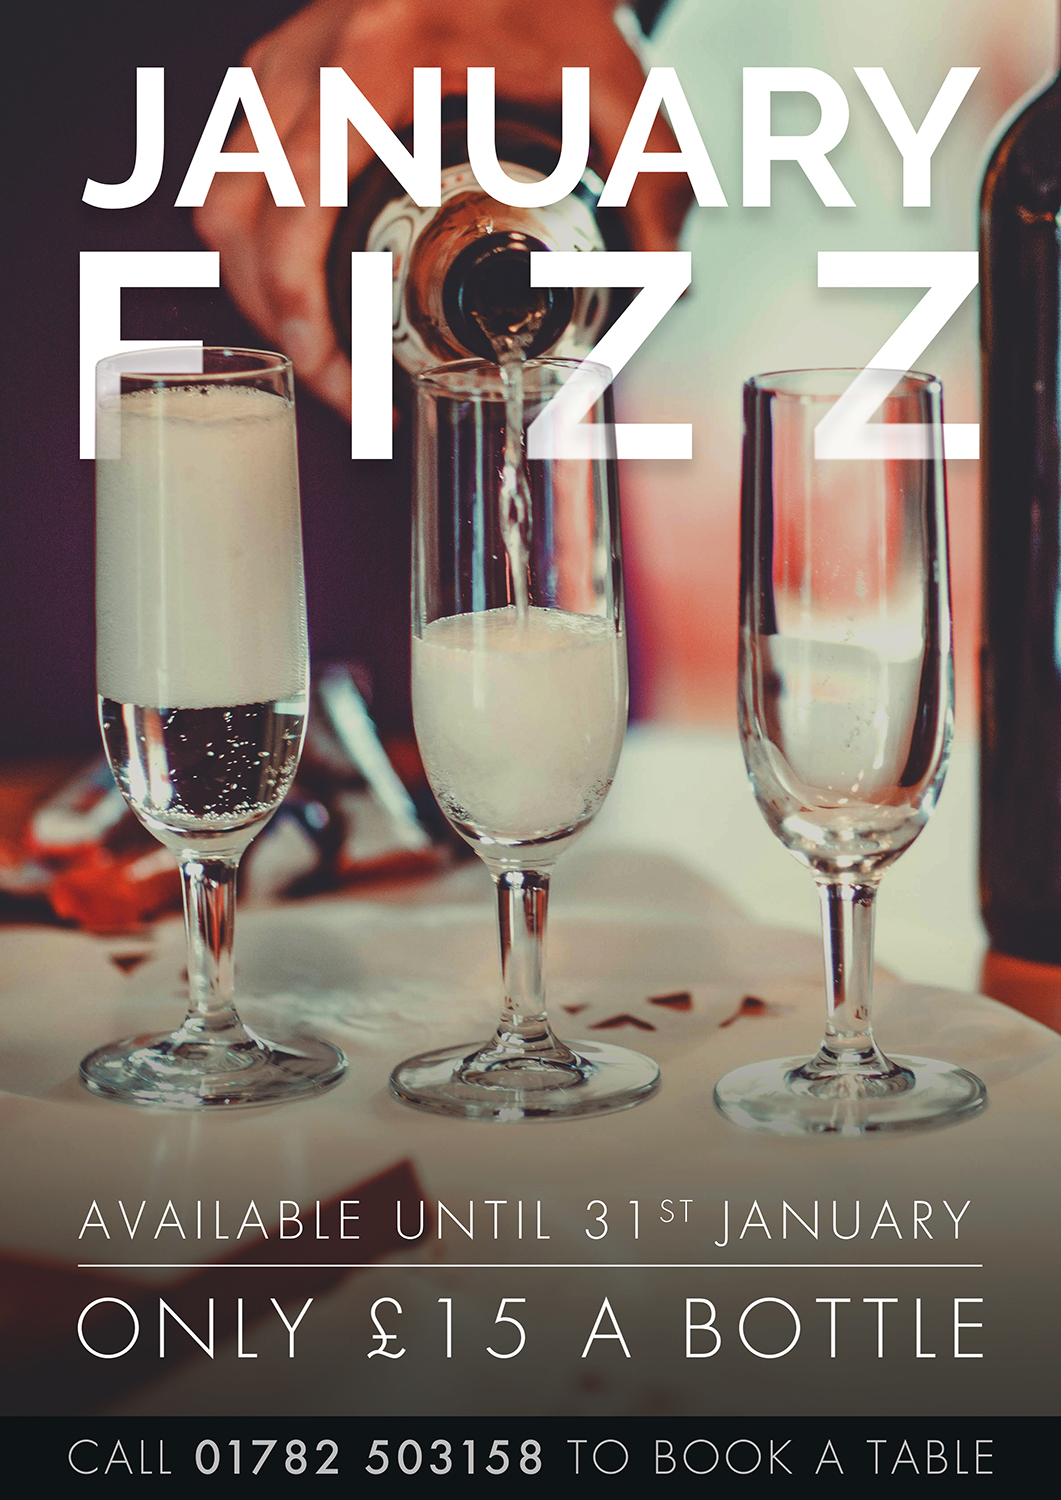 Join us for January fizz at only £15 per bottle